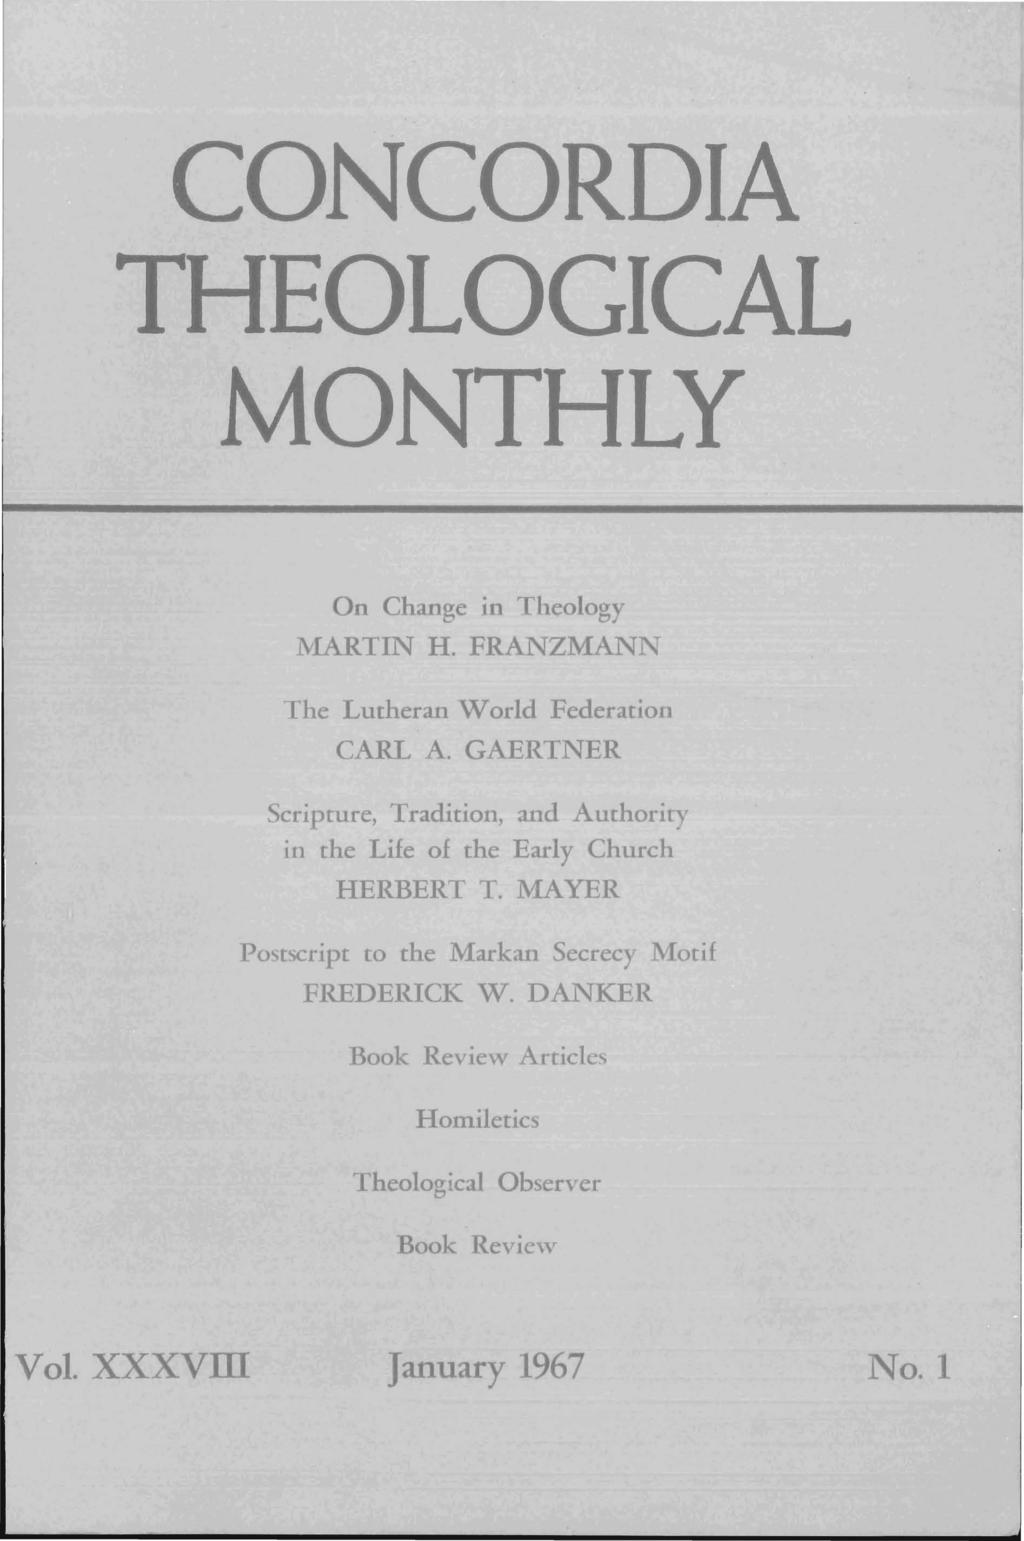 CONCORDIA THEOLOGICAL MONTHLY On Change in Theology MARTIN H. FRANZMANN The Lutheran Wodd Federation CARL A.